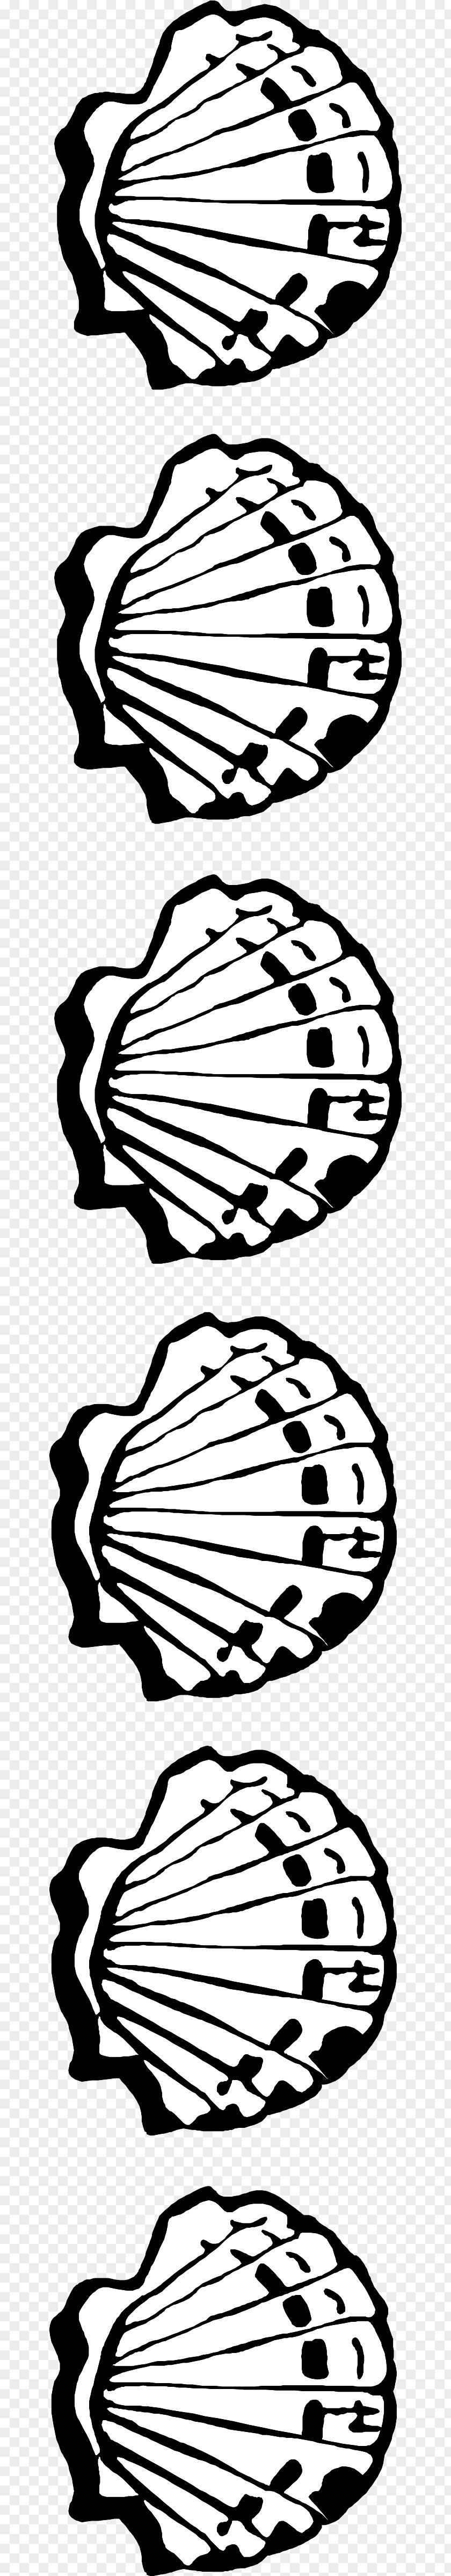 Seashell Stock Photography Clip Art PNG